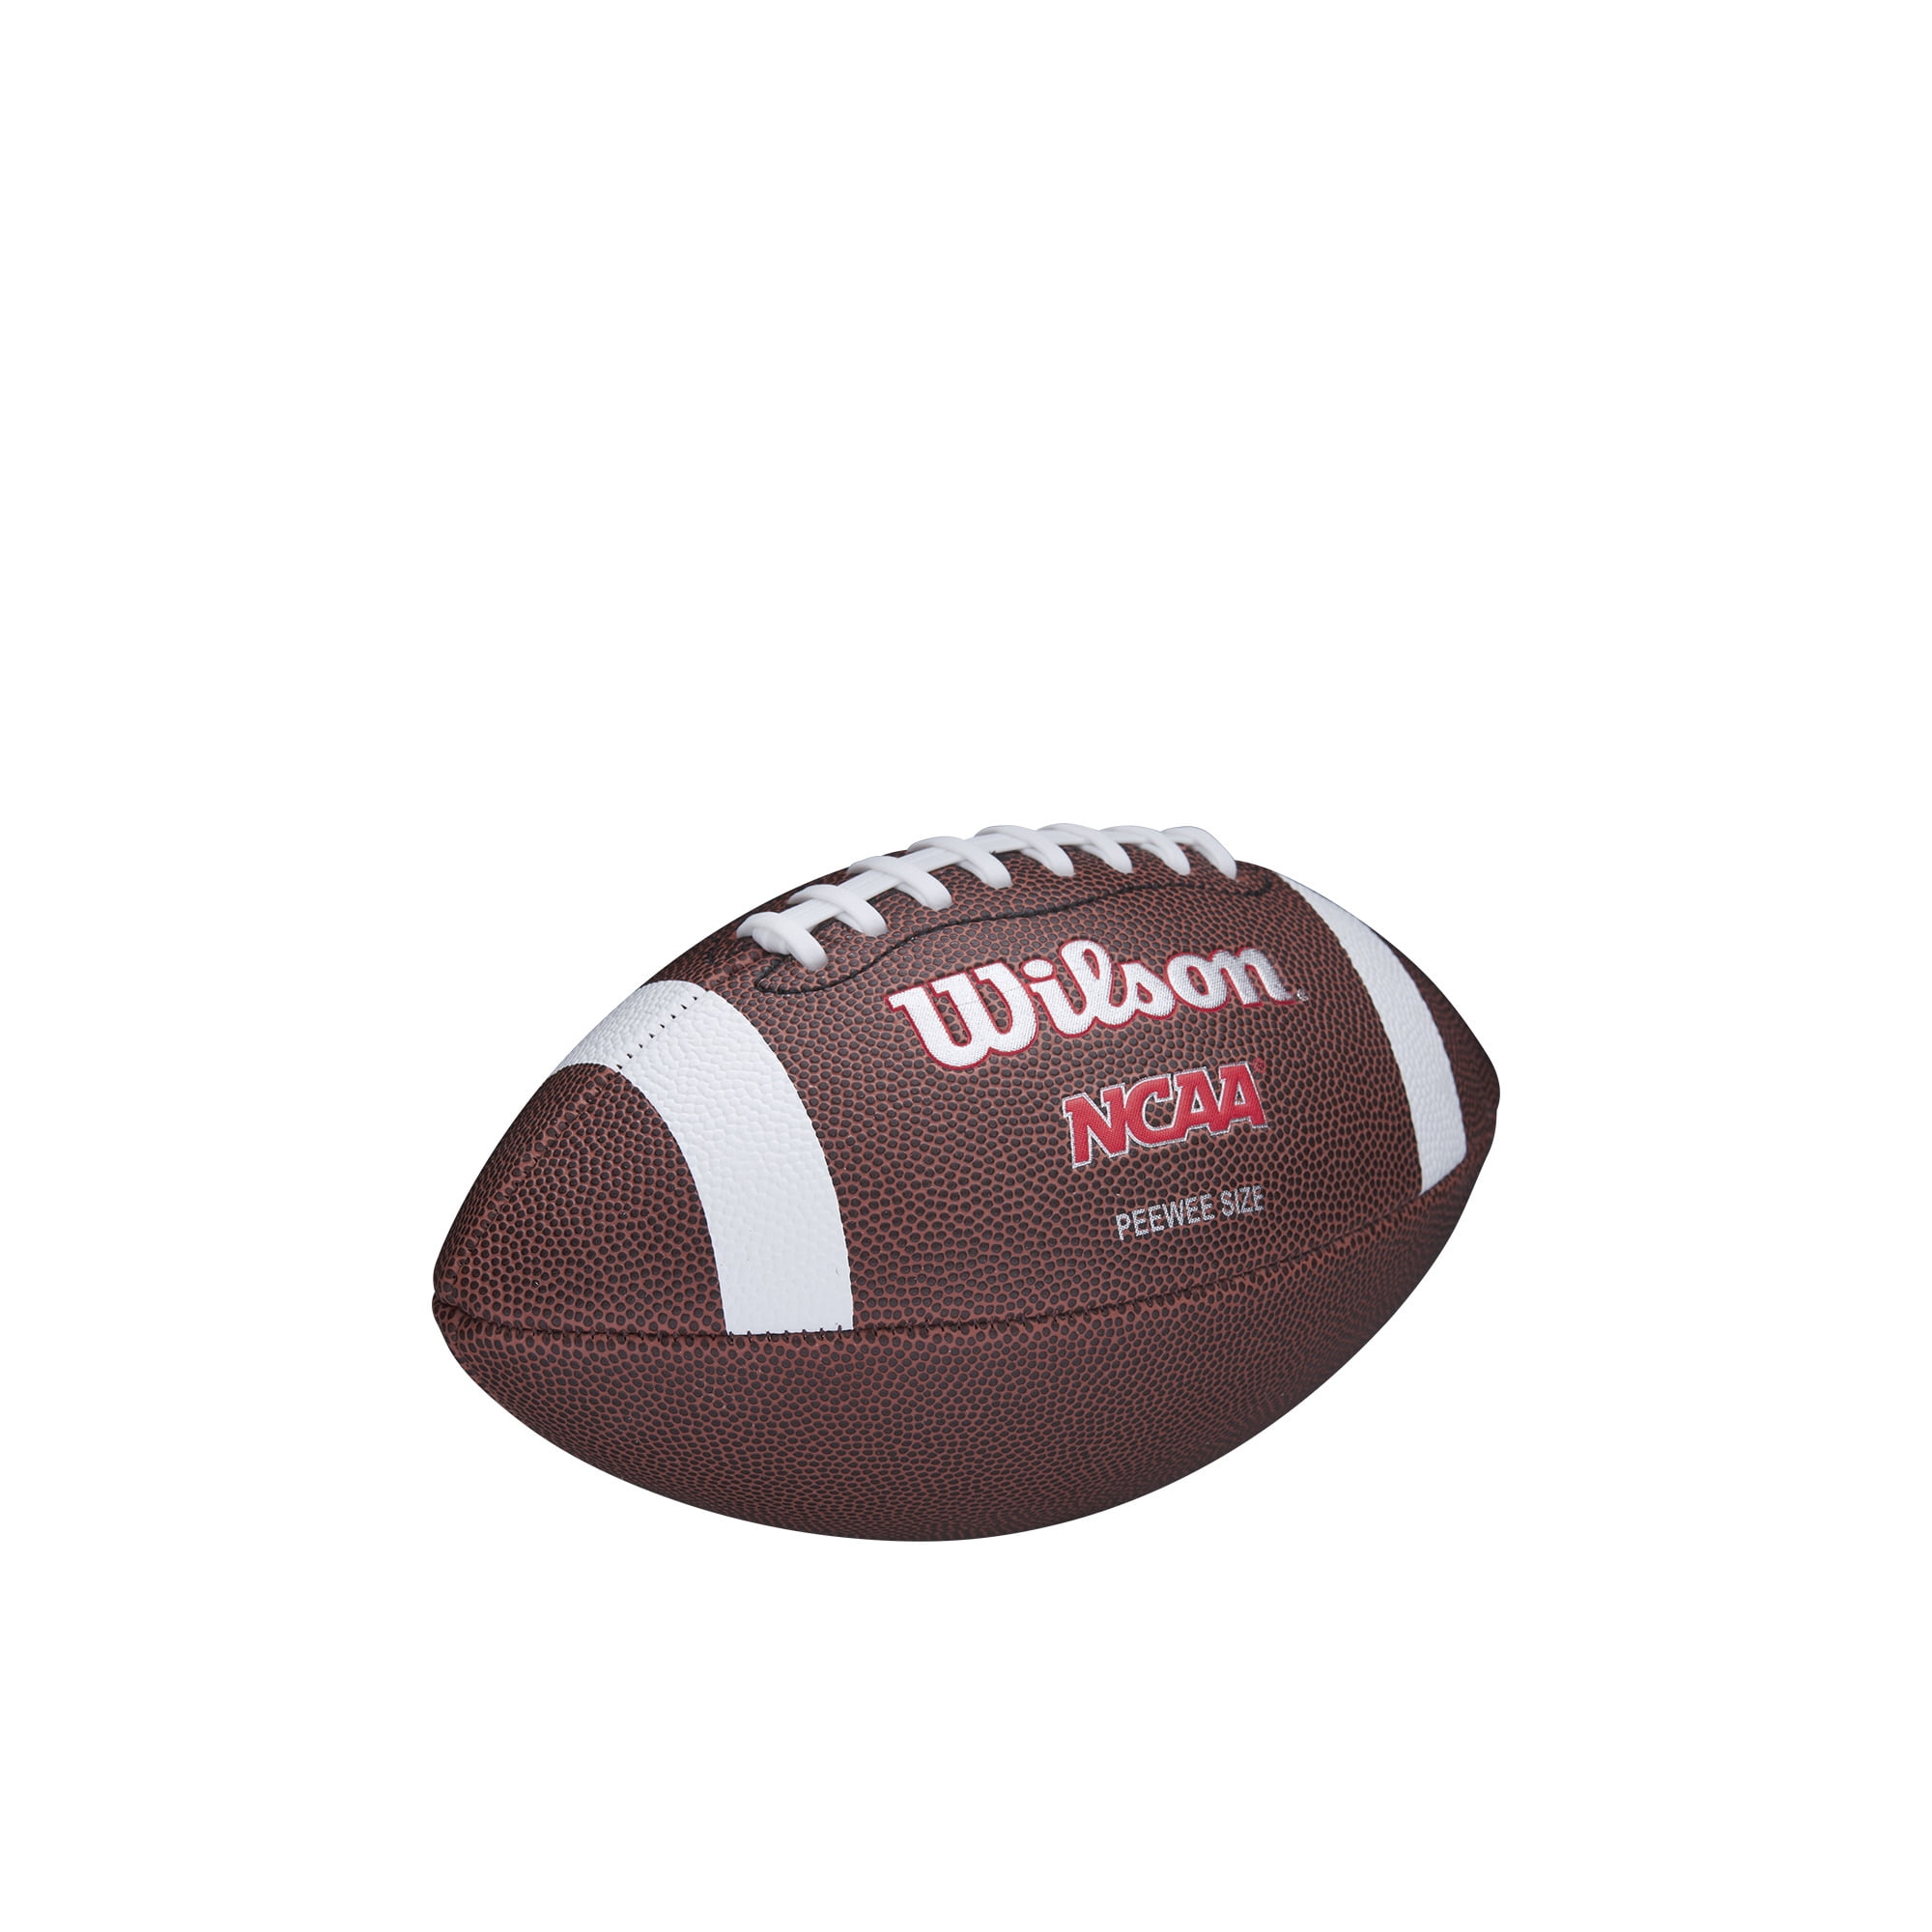 3 available Sizes Wilson NCAA Red Zone Composite Football Outdoor Sports Play 